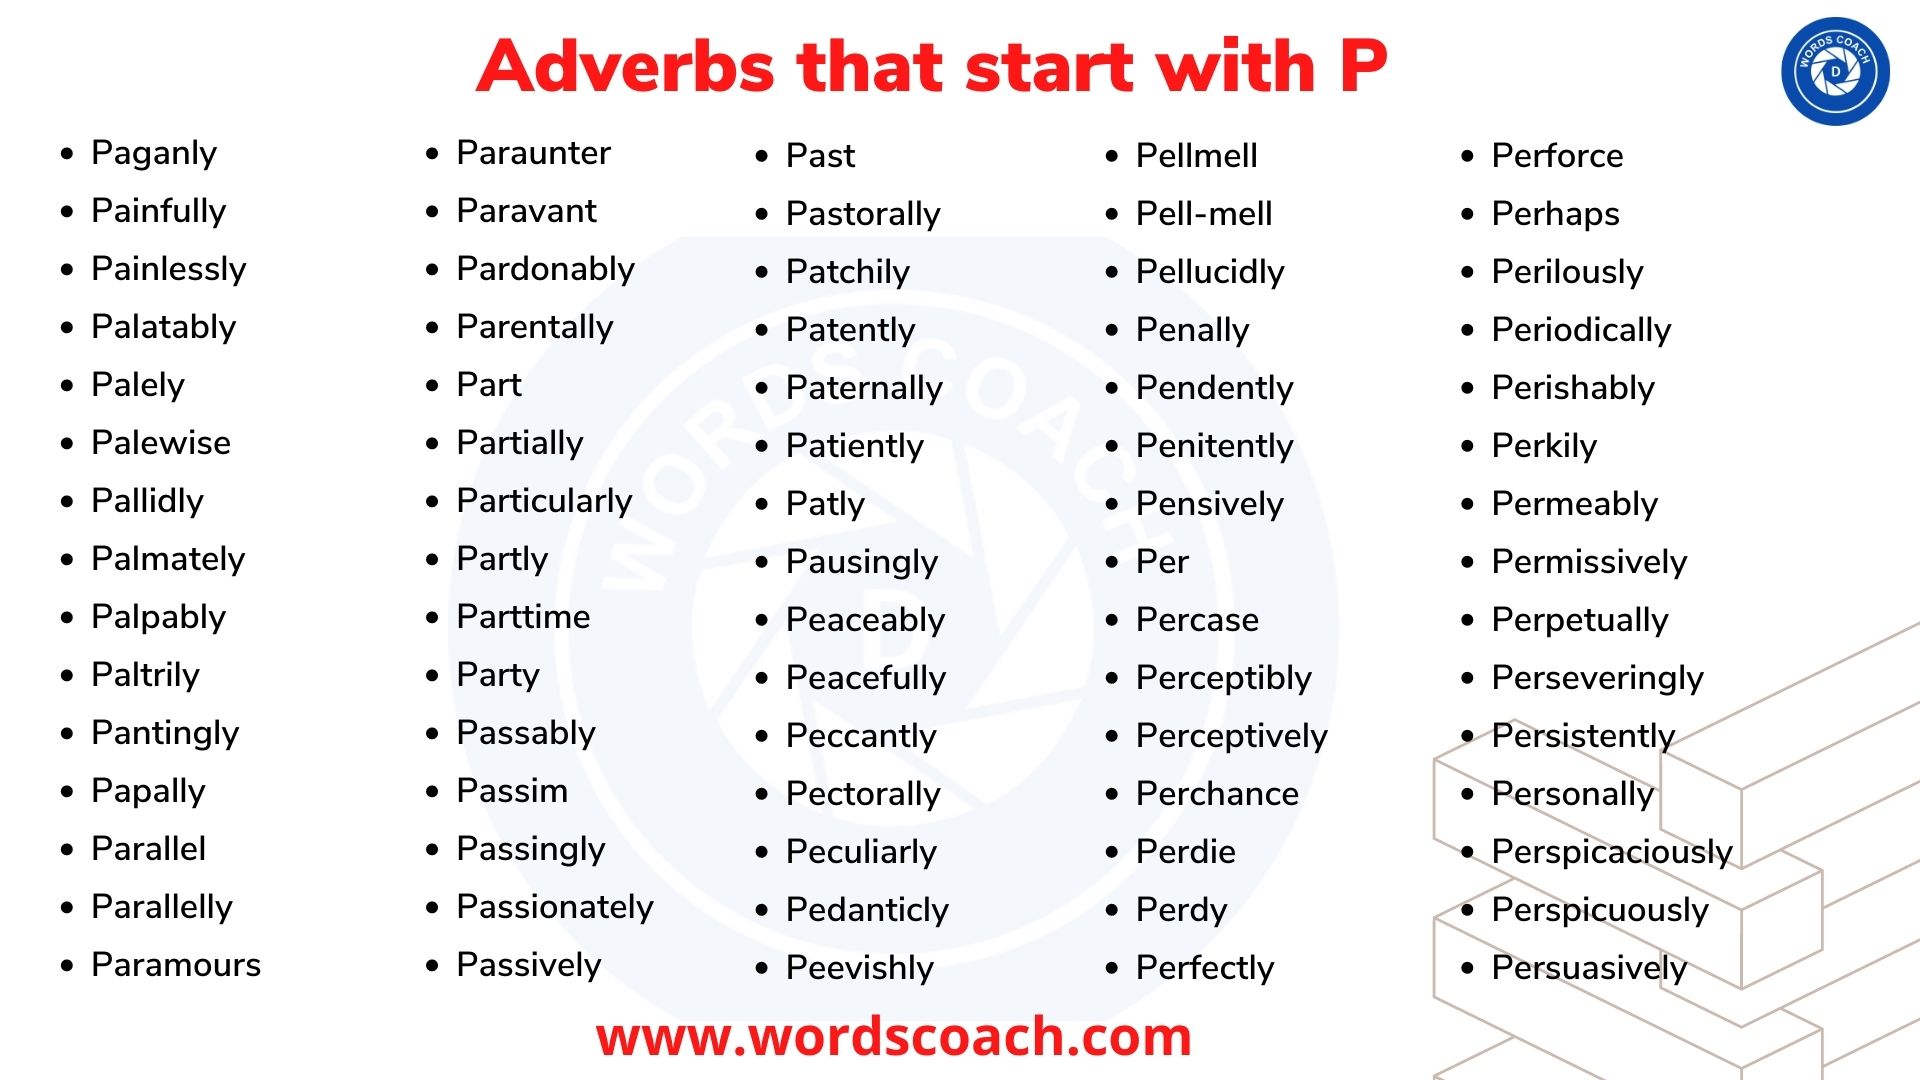 Adverbs that start with P - wordscoach.com